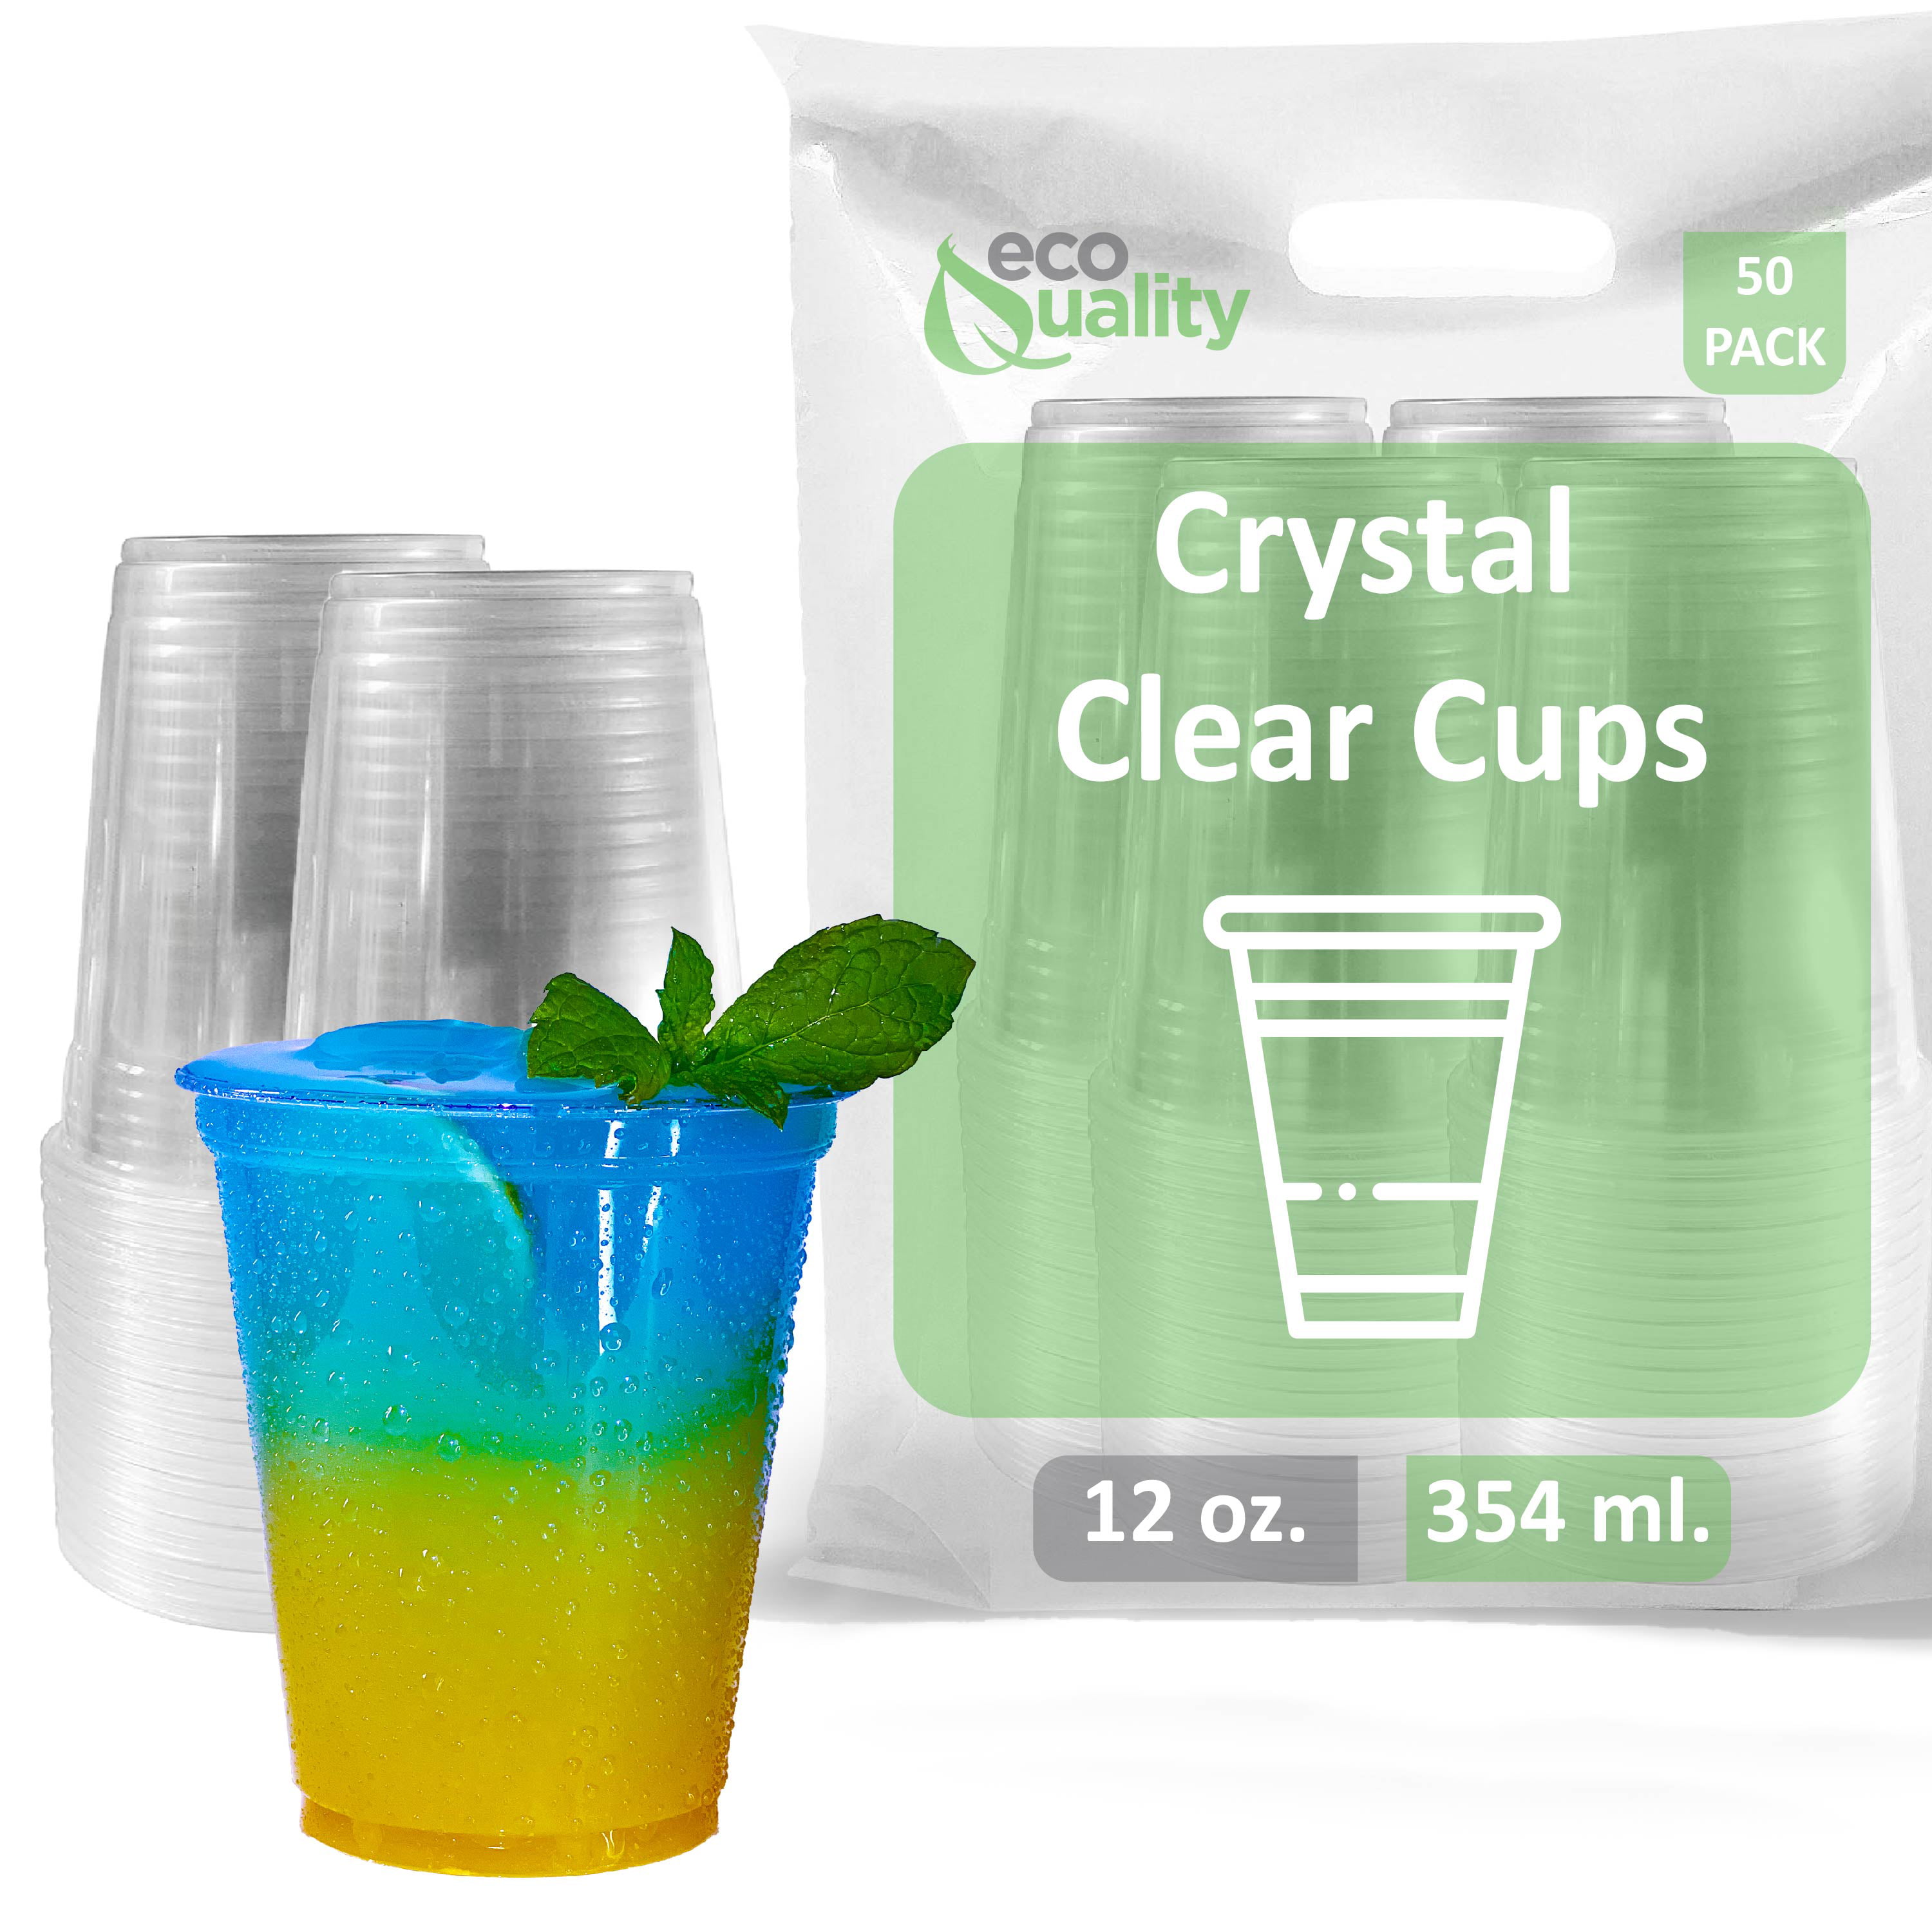 Ideal for Smoothies 500 x RECYCLABLE CLEAR PET PLASTIC LIDS FOR 12oz CUPS 